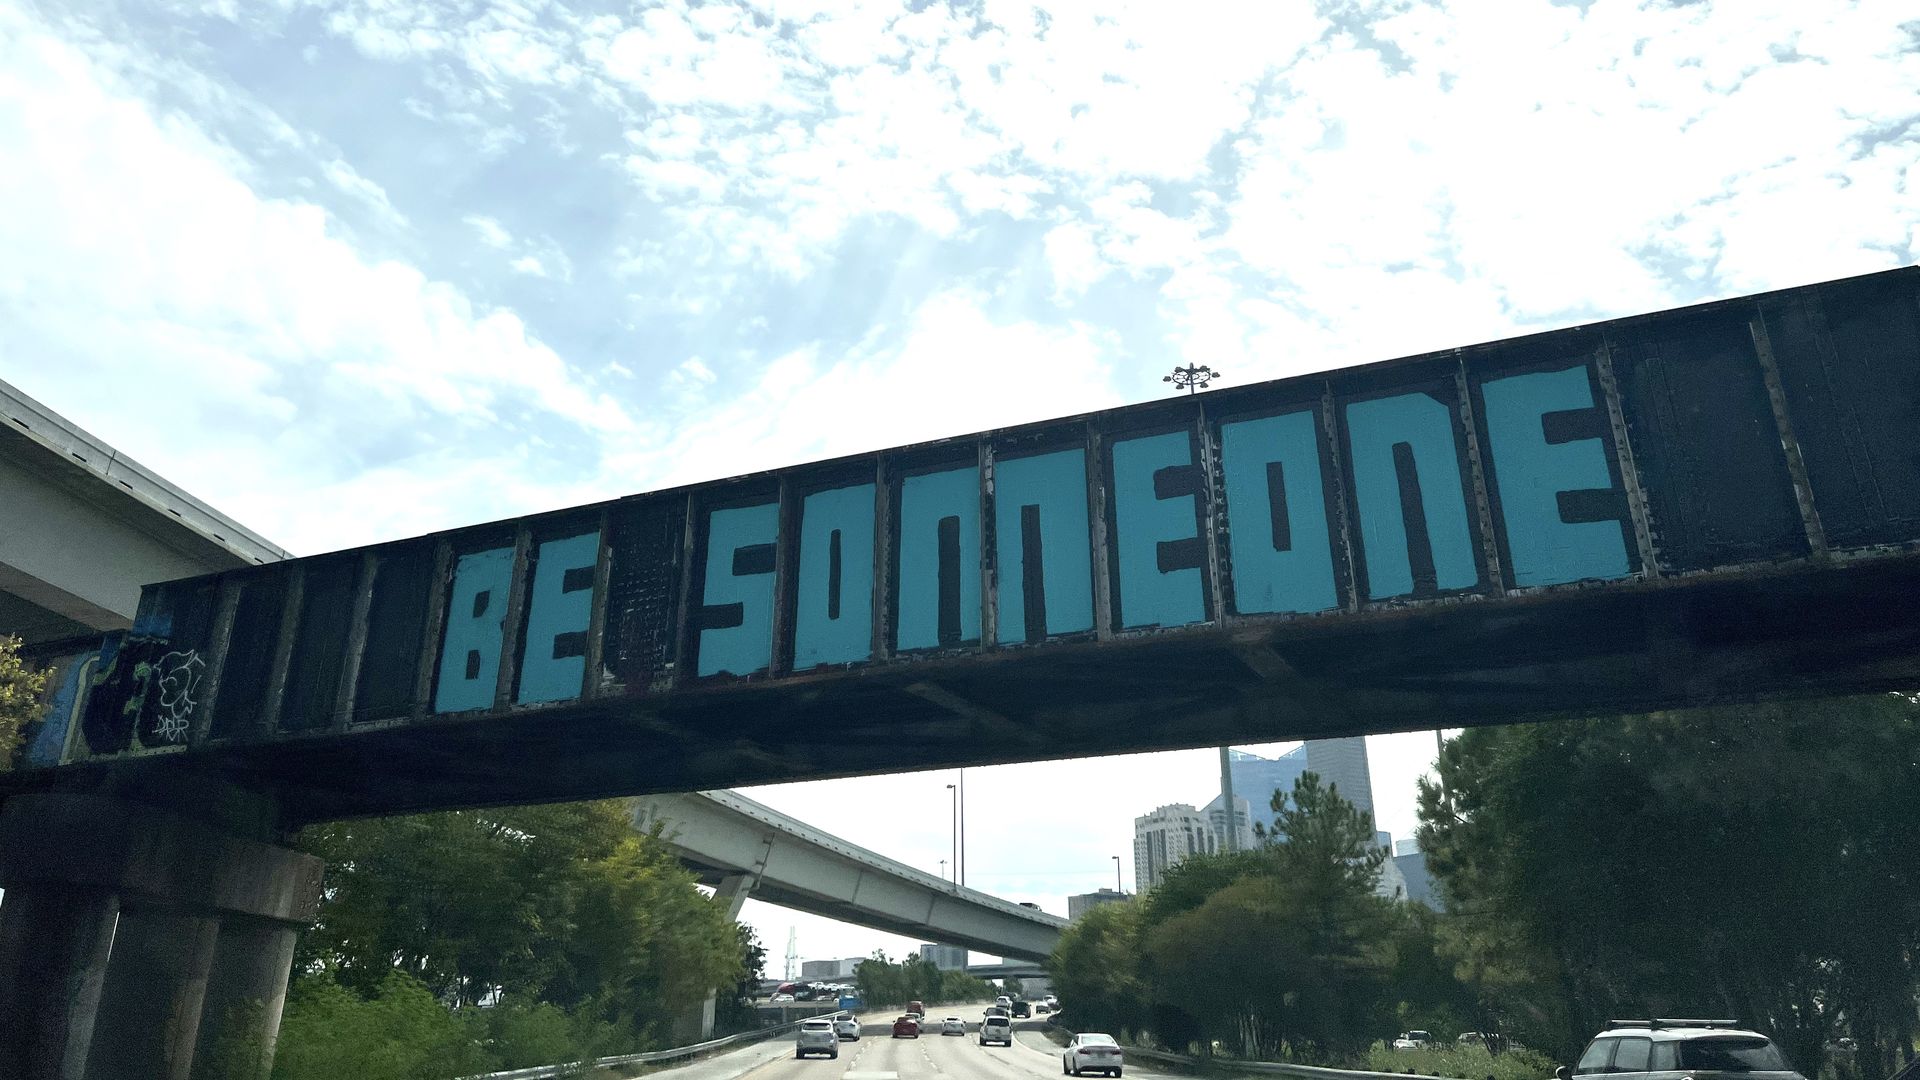 The words "Be Someone" inscribed in blue on a train bridge over the freeway